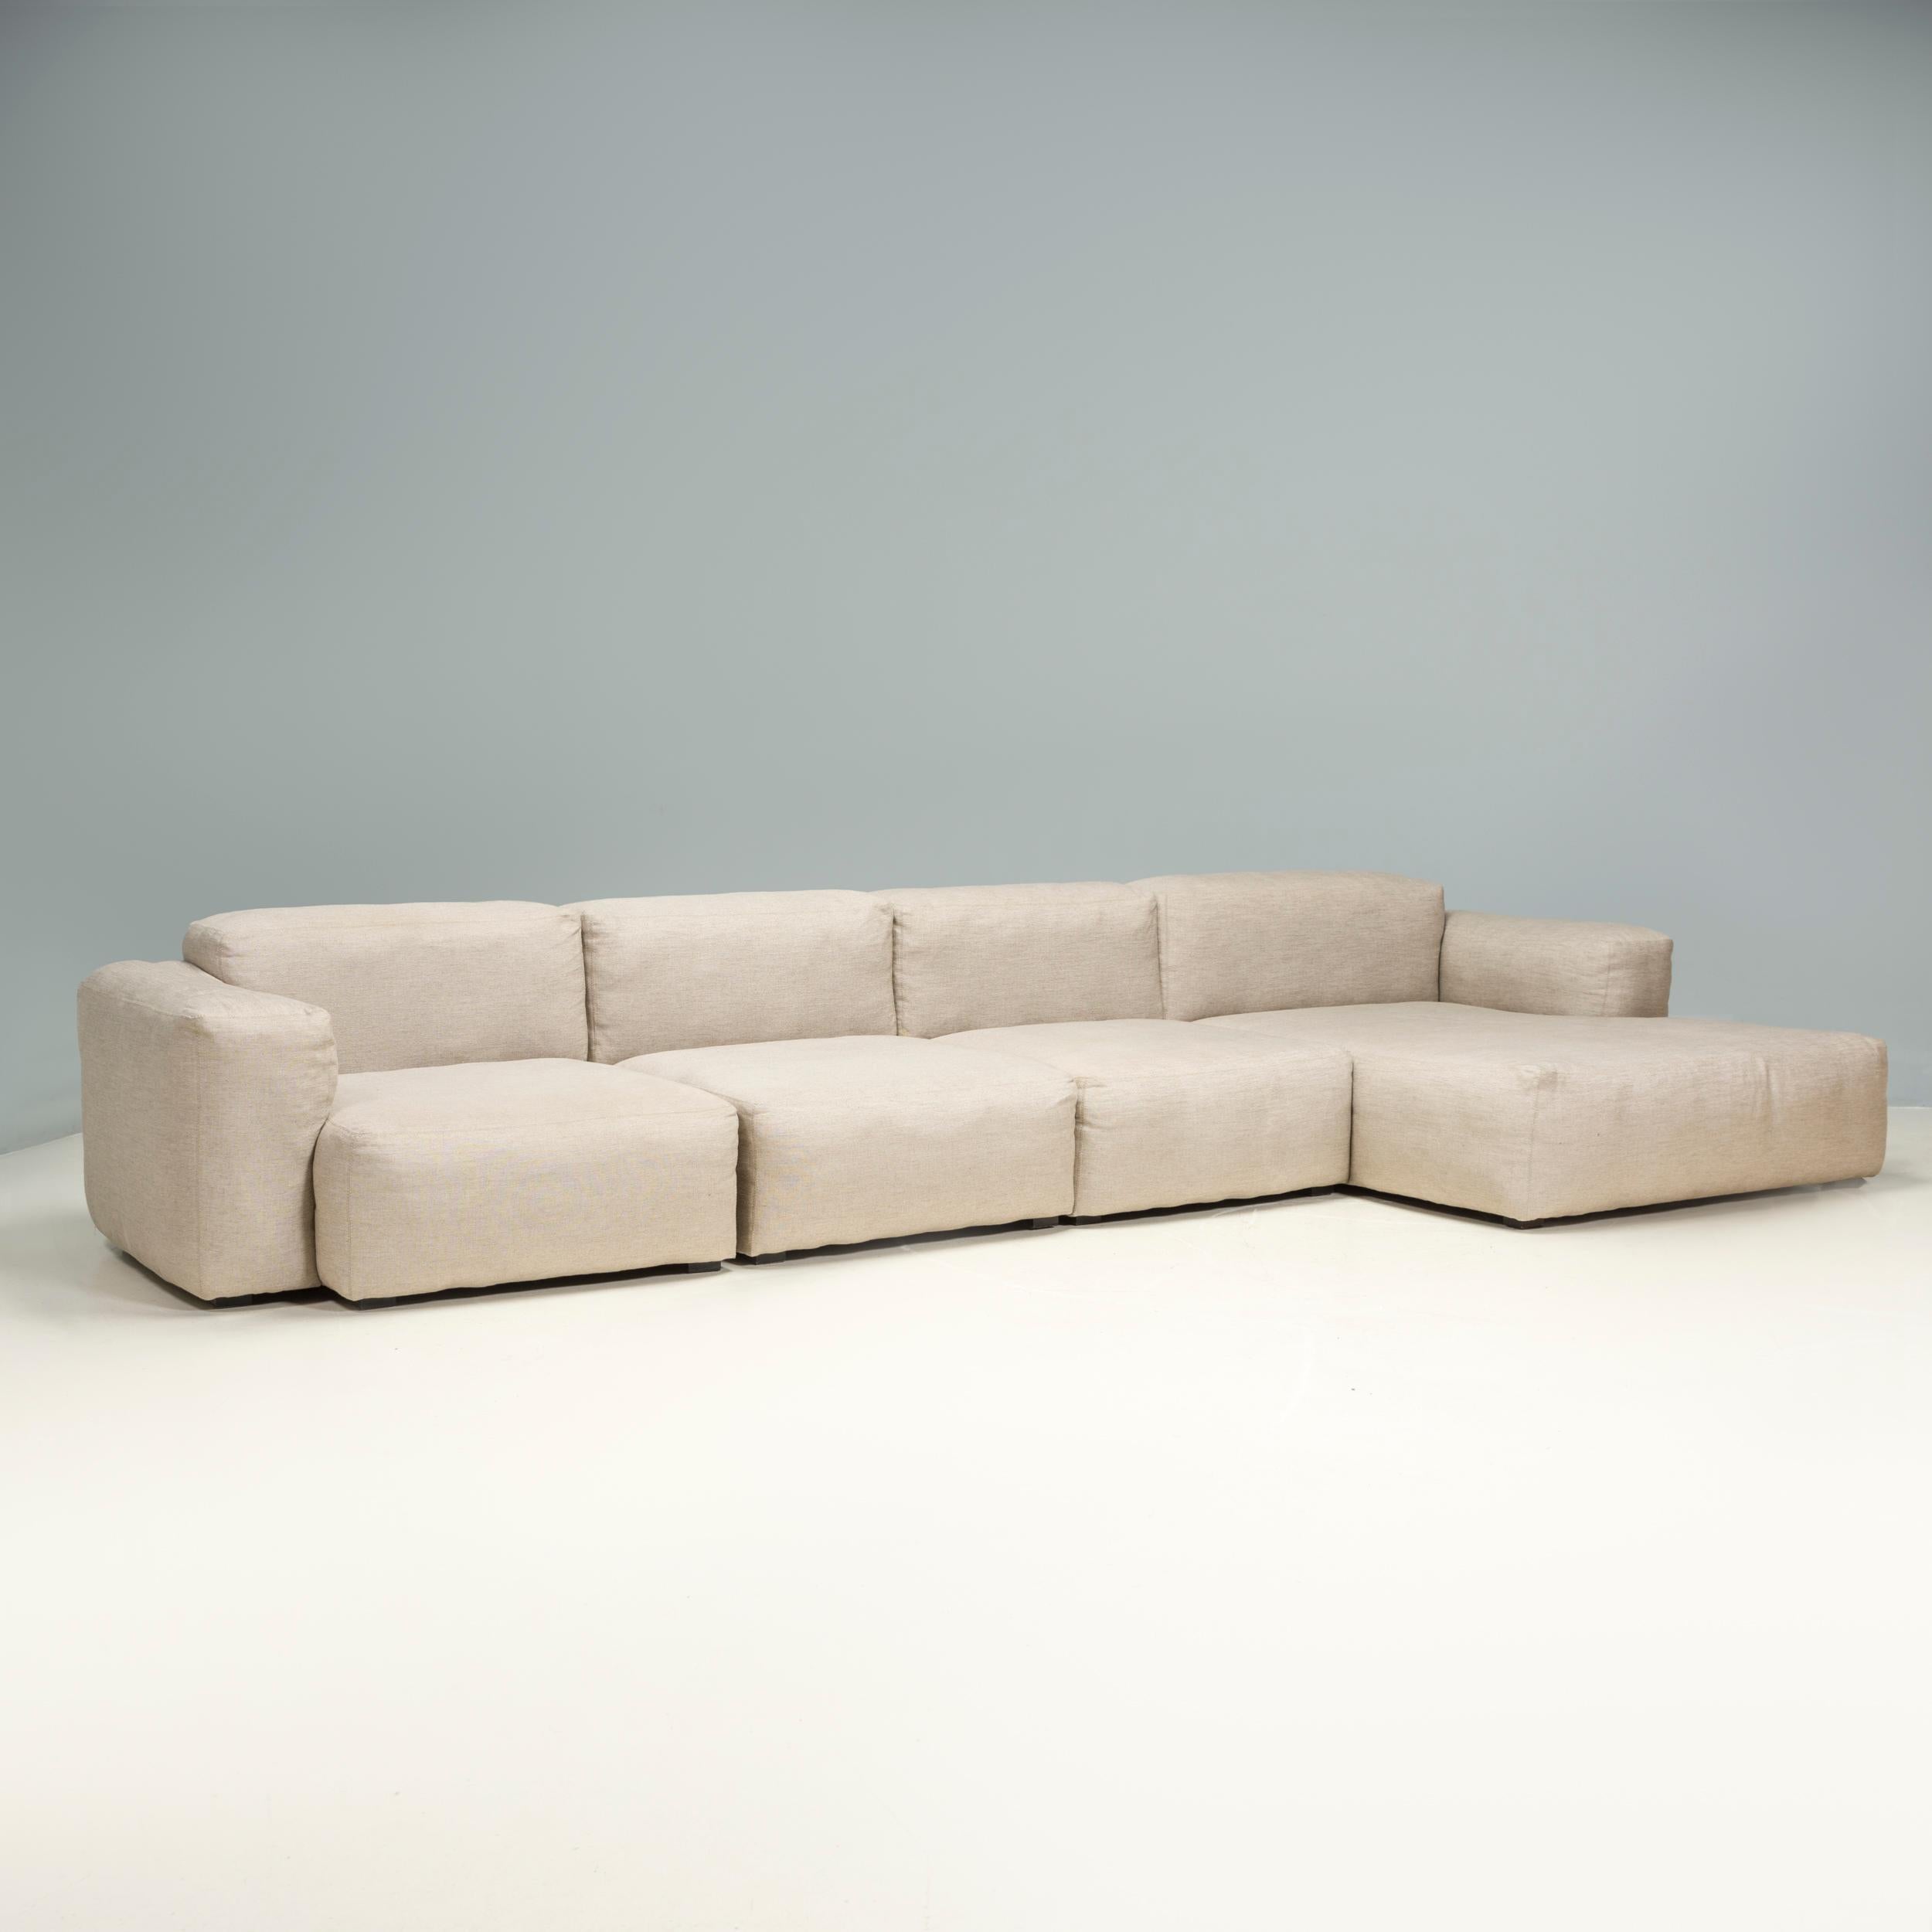 Designed by HAY, the Mags Soft sofa was intended as a more informal iteration of the original Mag, with rounded corners and softer cushions to create the ultimate lounging experience.

Formed of four separate units, the sofa features an arm module,